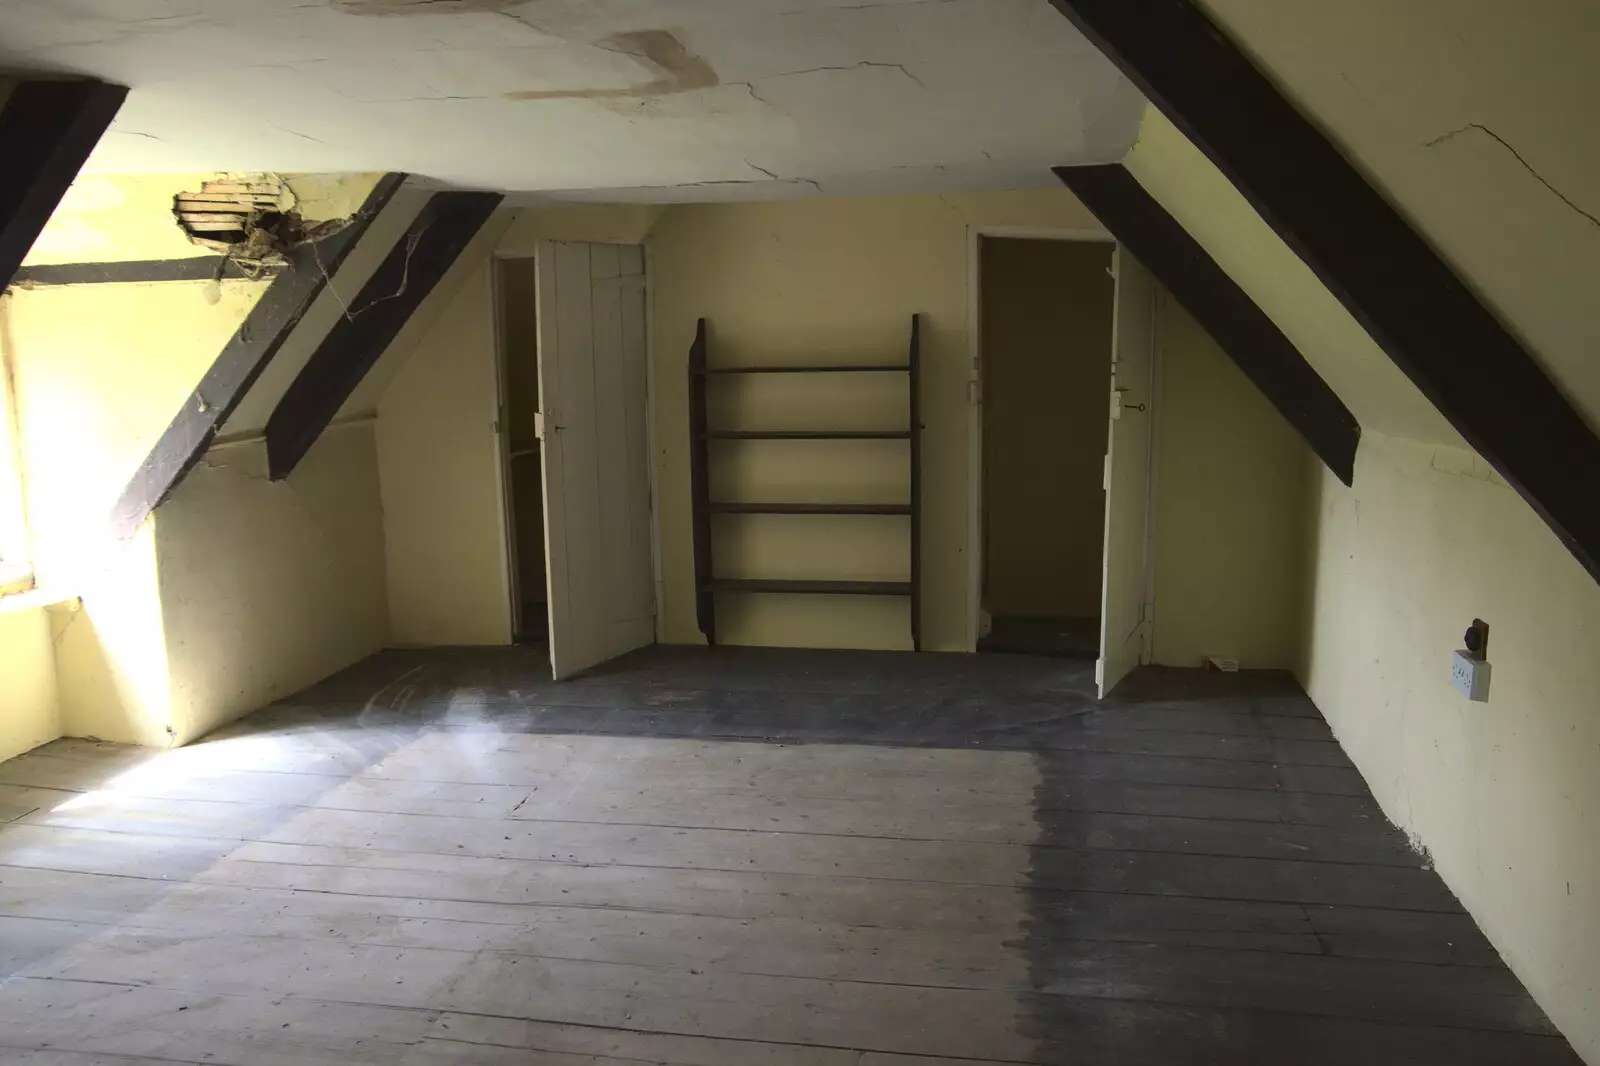 One of the upstairs attic rooms, from A 1940s Timewarp, Site 4, Bungay Airfield, Flixton, Suffolk - 9th June 2022